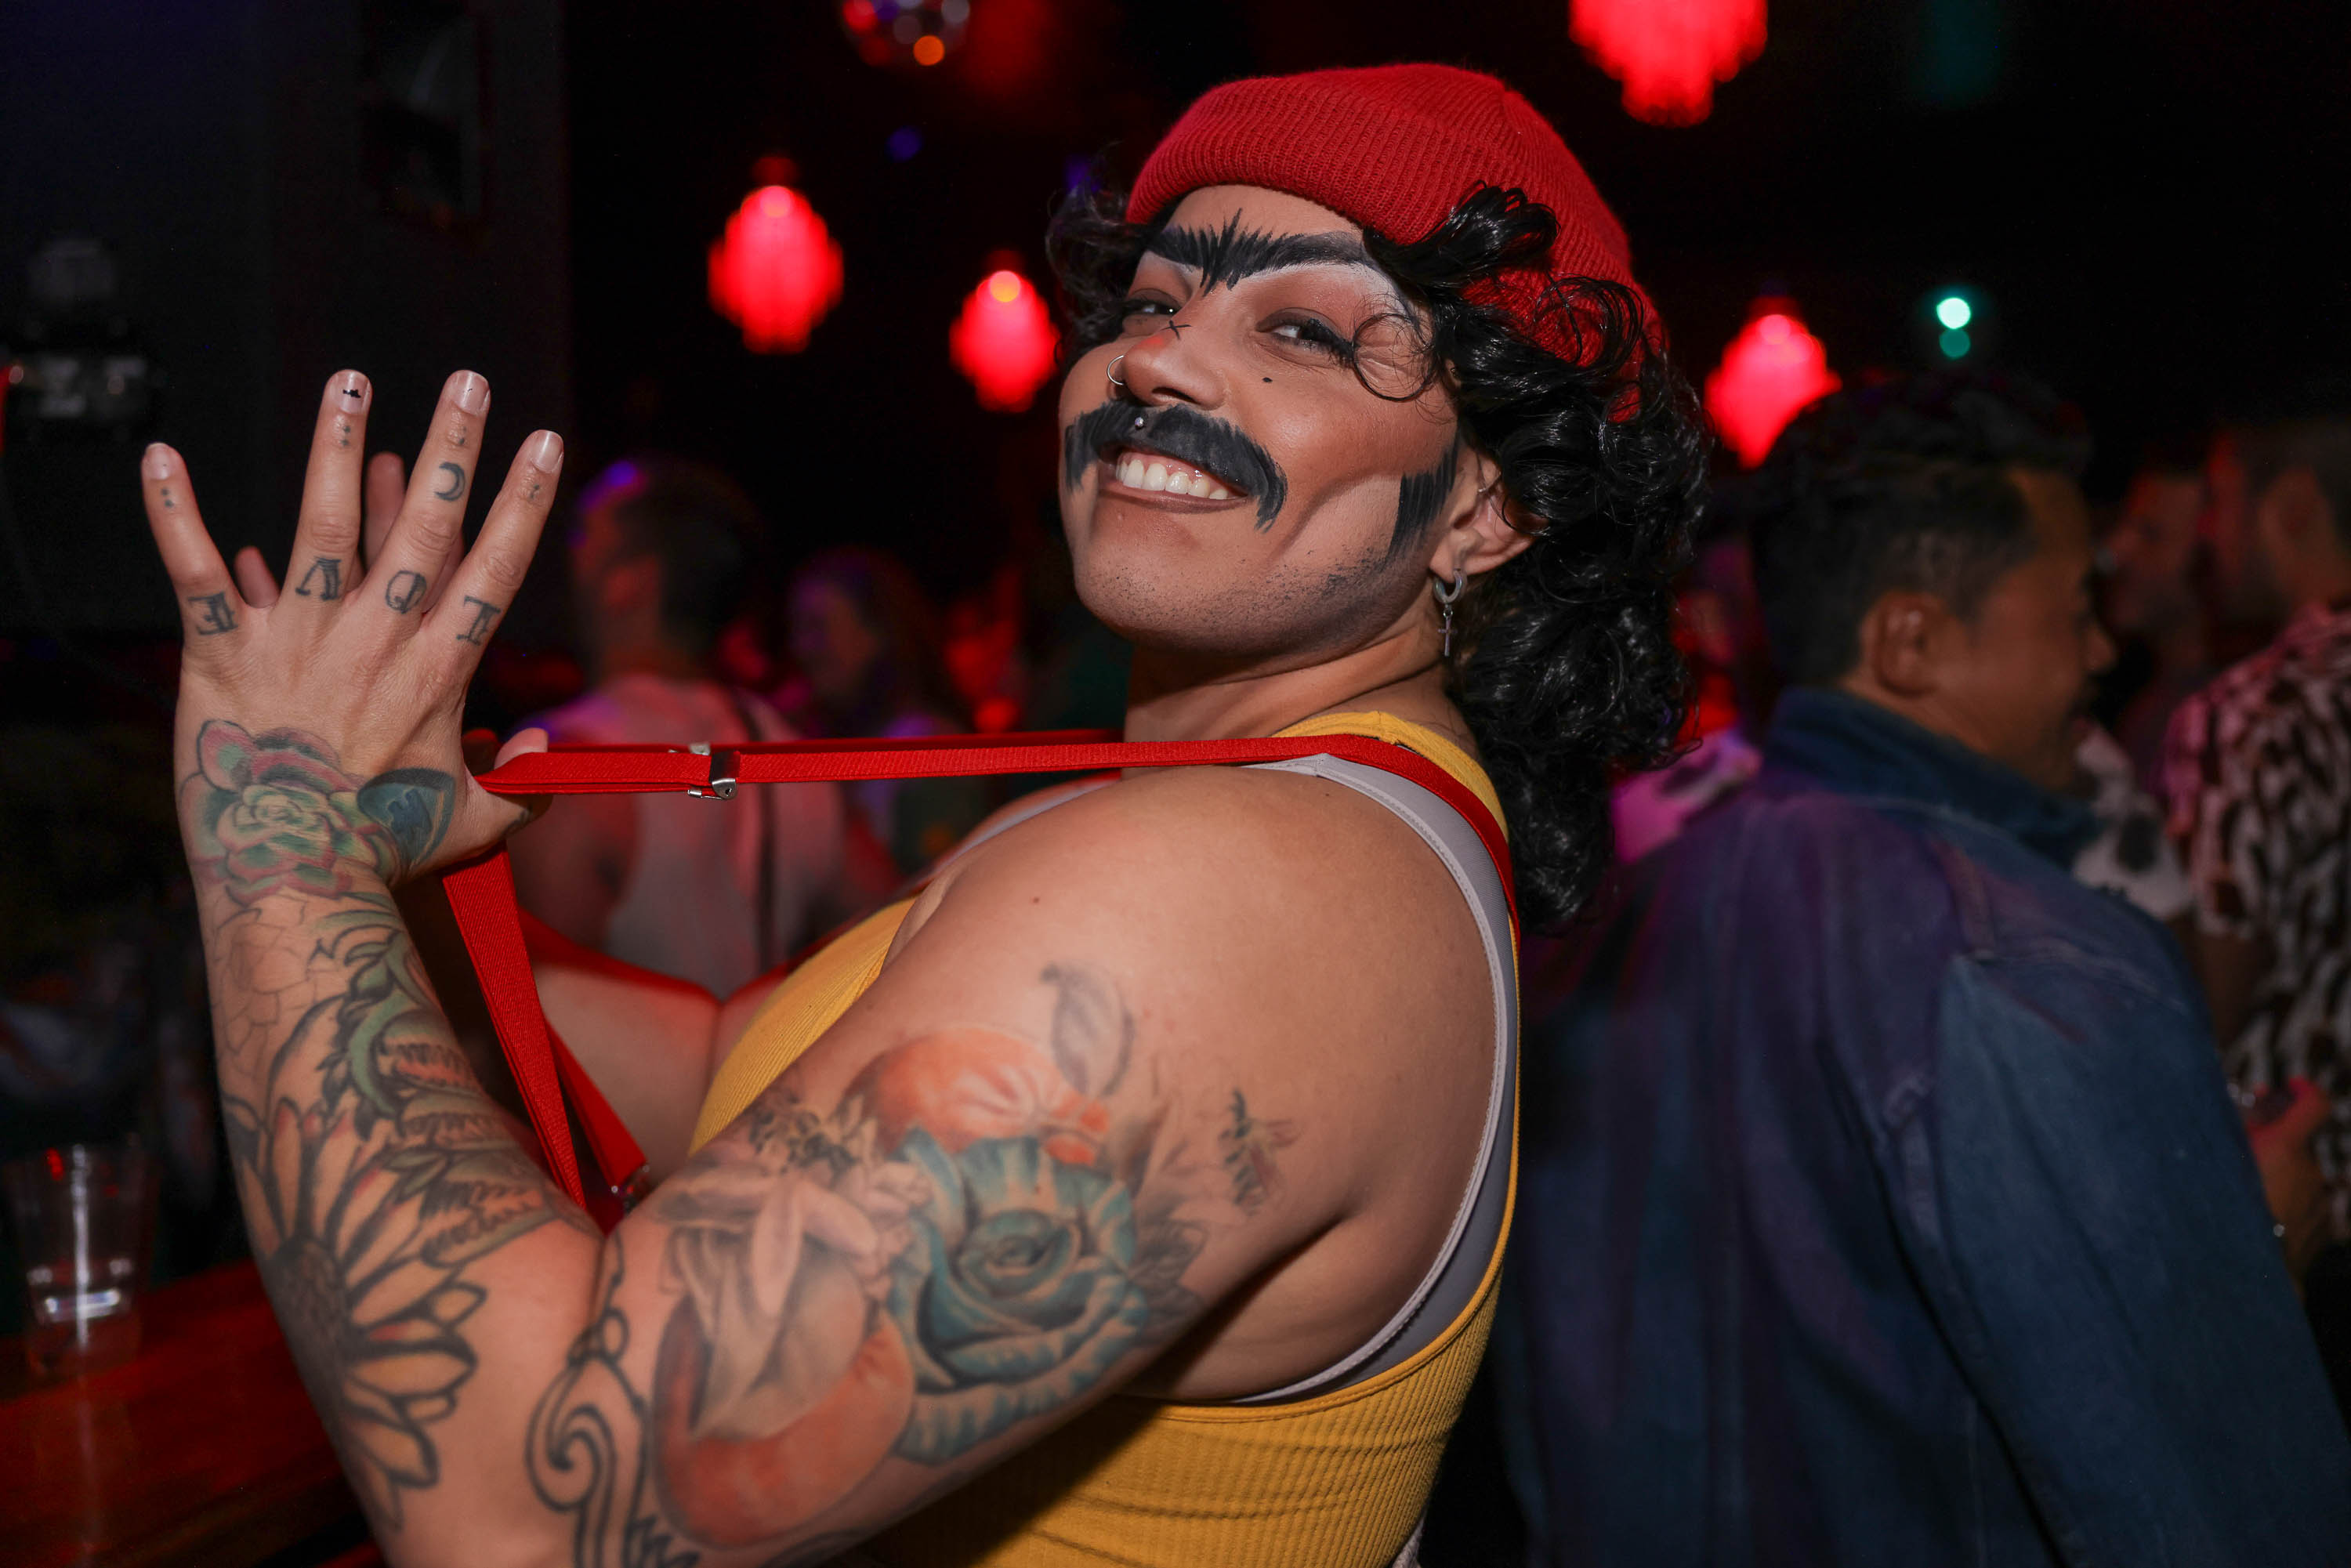 a smiling, mustachioed person in a red hat flicks a red suspender, their tattooed arm exposed